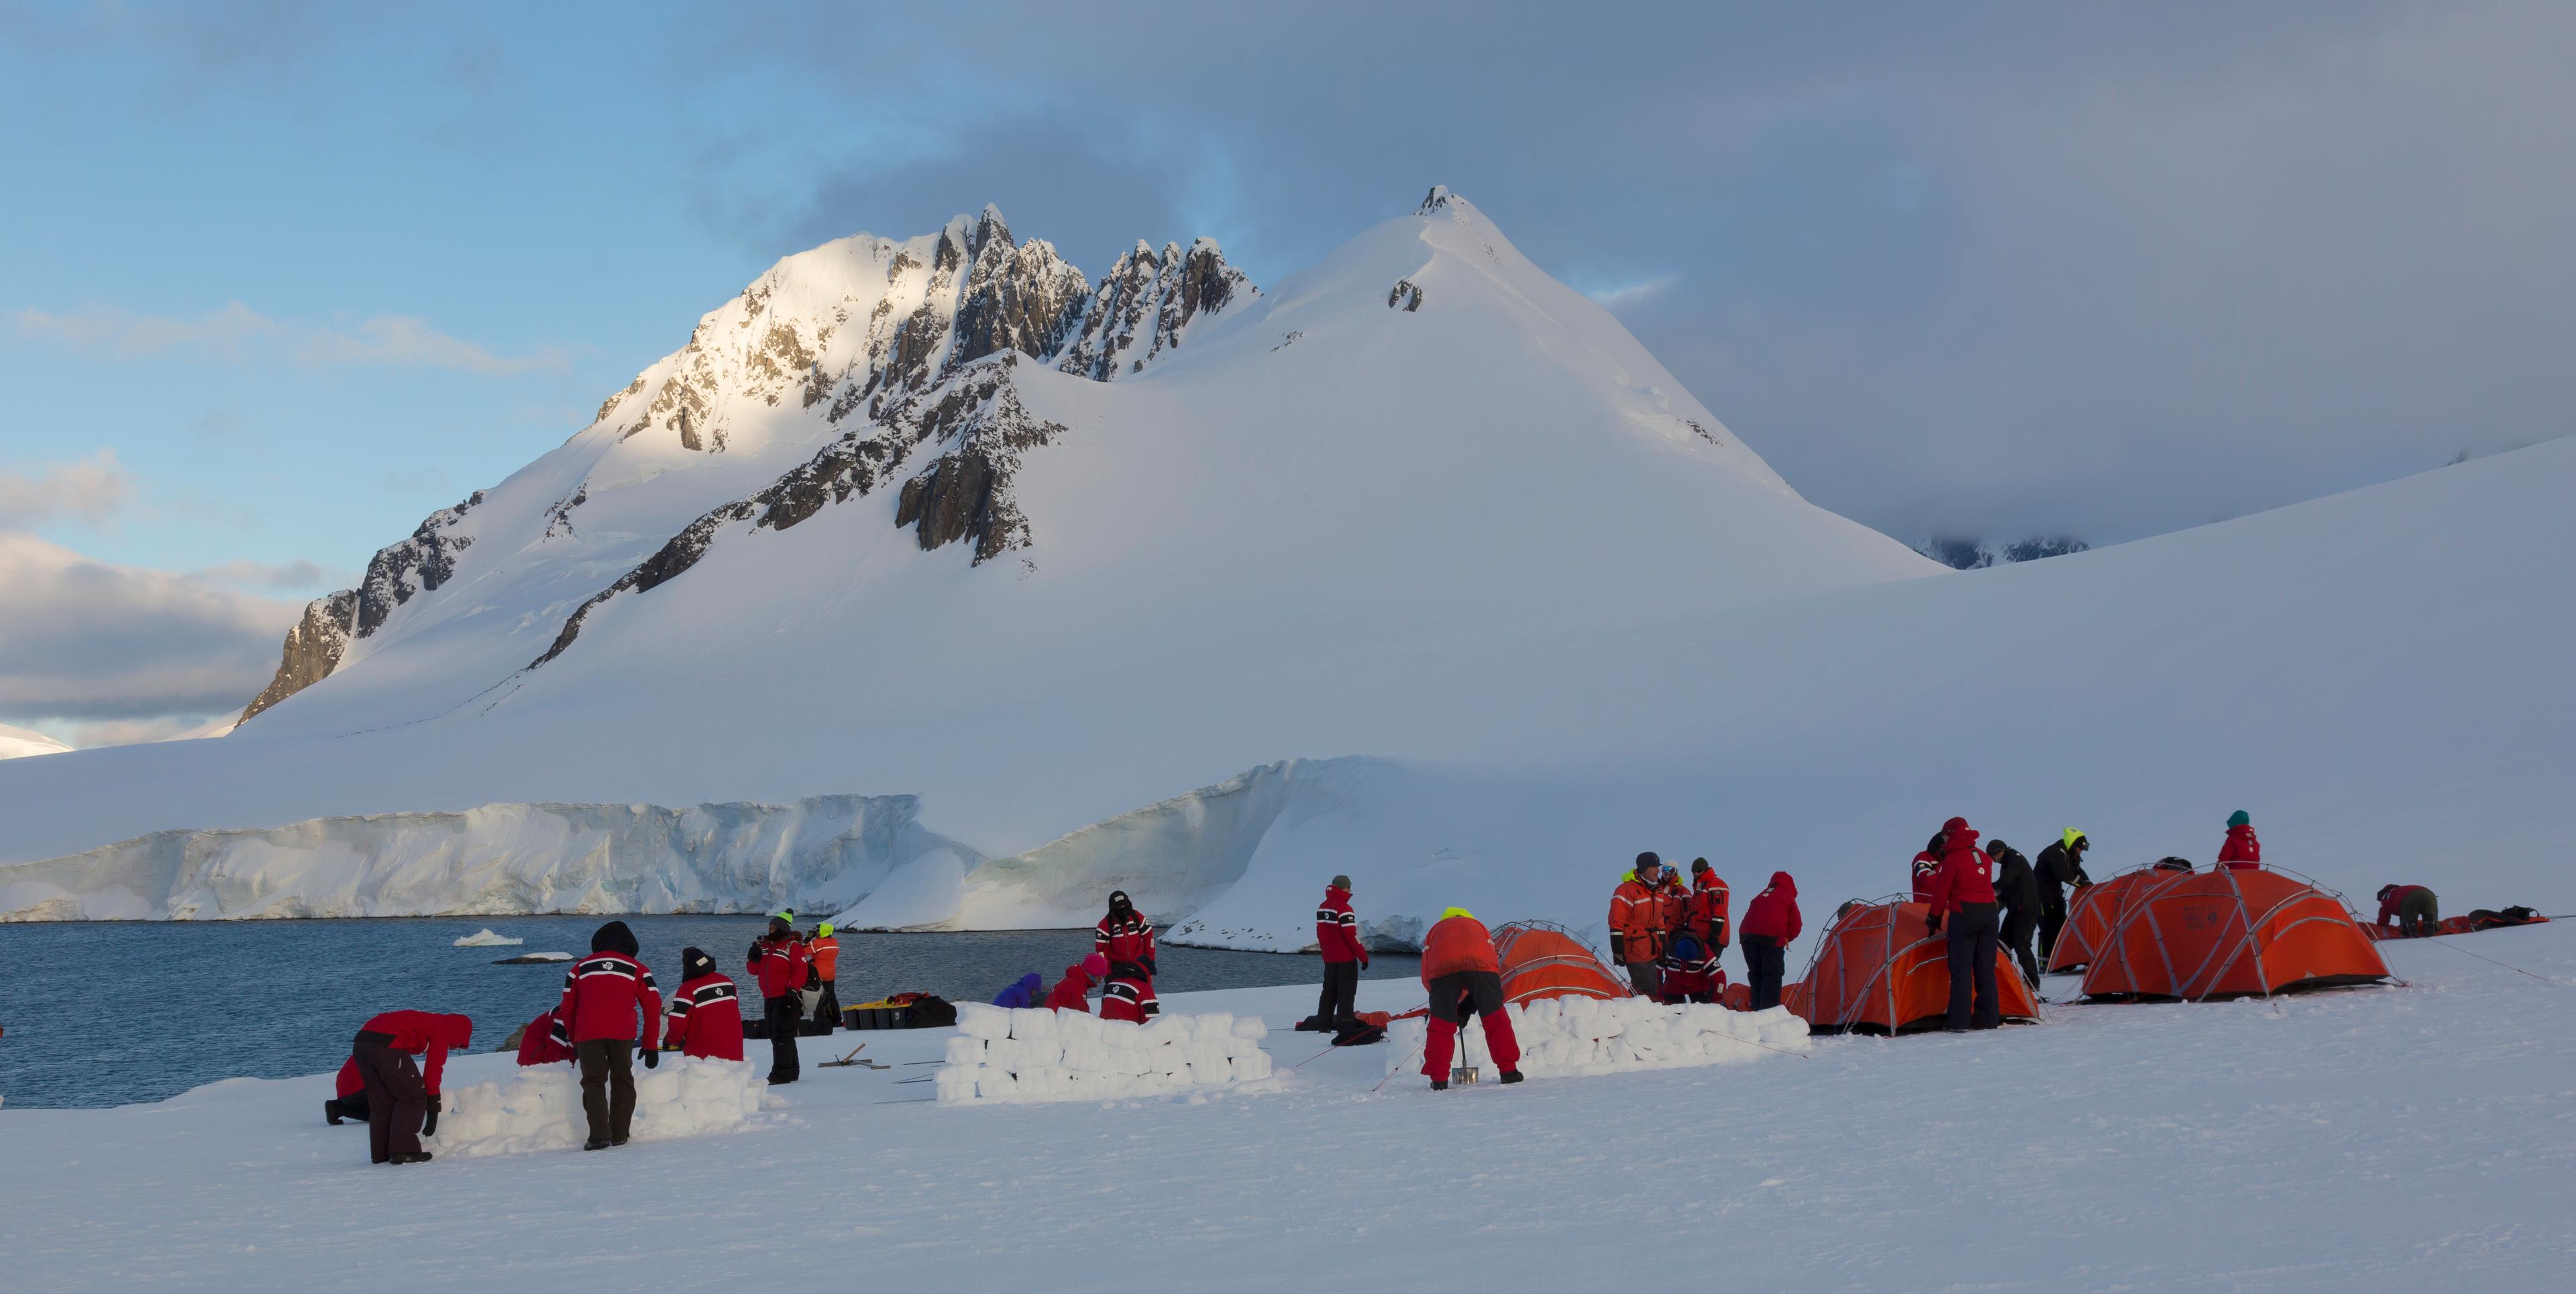 Everything you need to consider when choosing an expedition to Antarctica